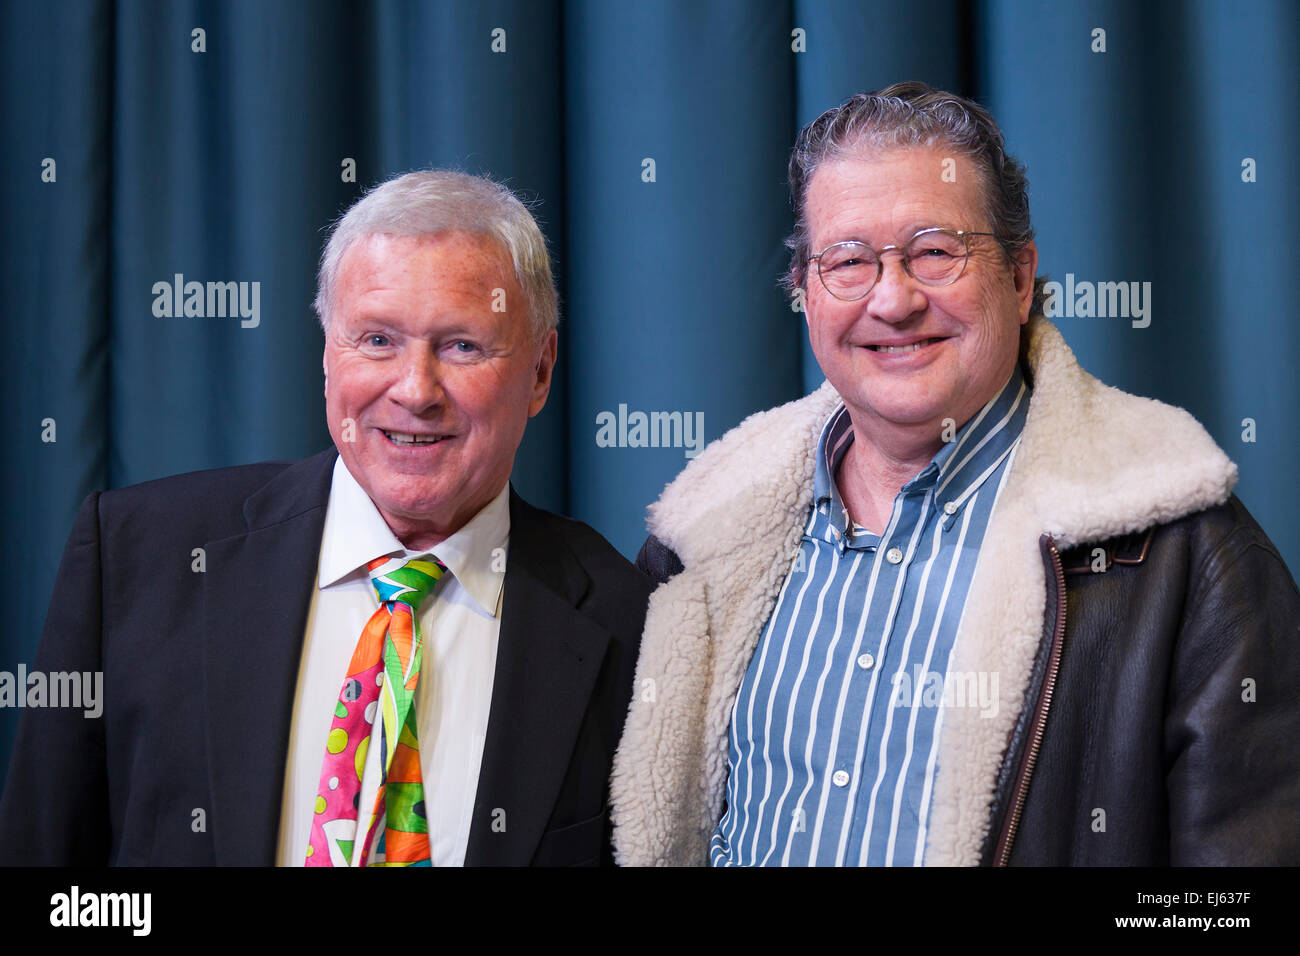 Walsall, West Midlands, UK. 22 March 2015. David Hamilton (L) with Clive Doig British television producer director (R) at a recording of ‘The David Hamilton Show’ for Big Centre TV. Hosted by presenter and broadcaster ‘Diddy’ David Hamilton the show features famous personalities from across the music and television spectrum. Credit:  John Henshall / Alamy Live News PER0541 Stock Photo